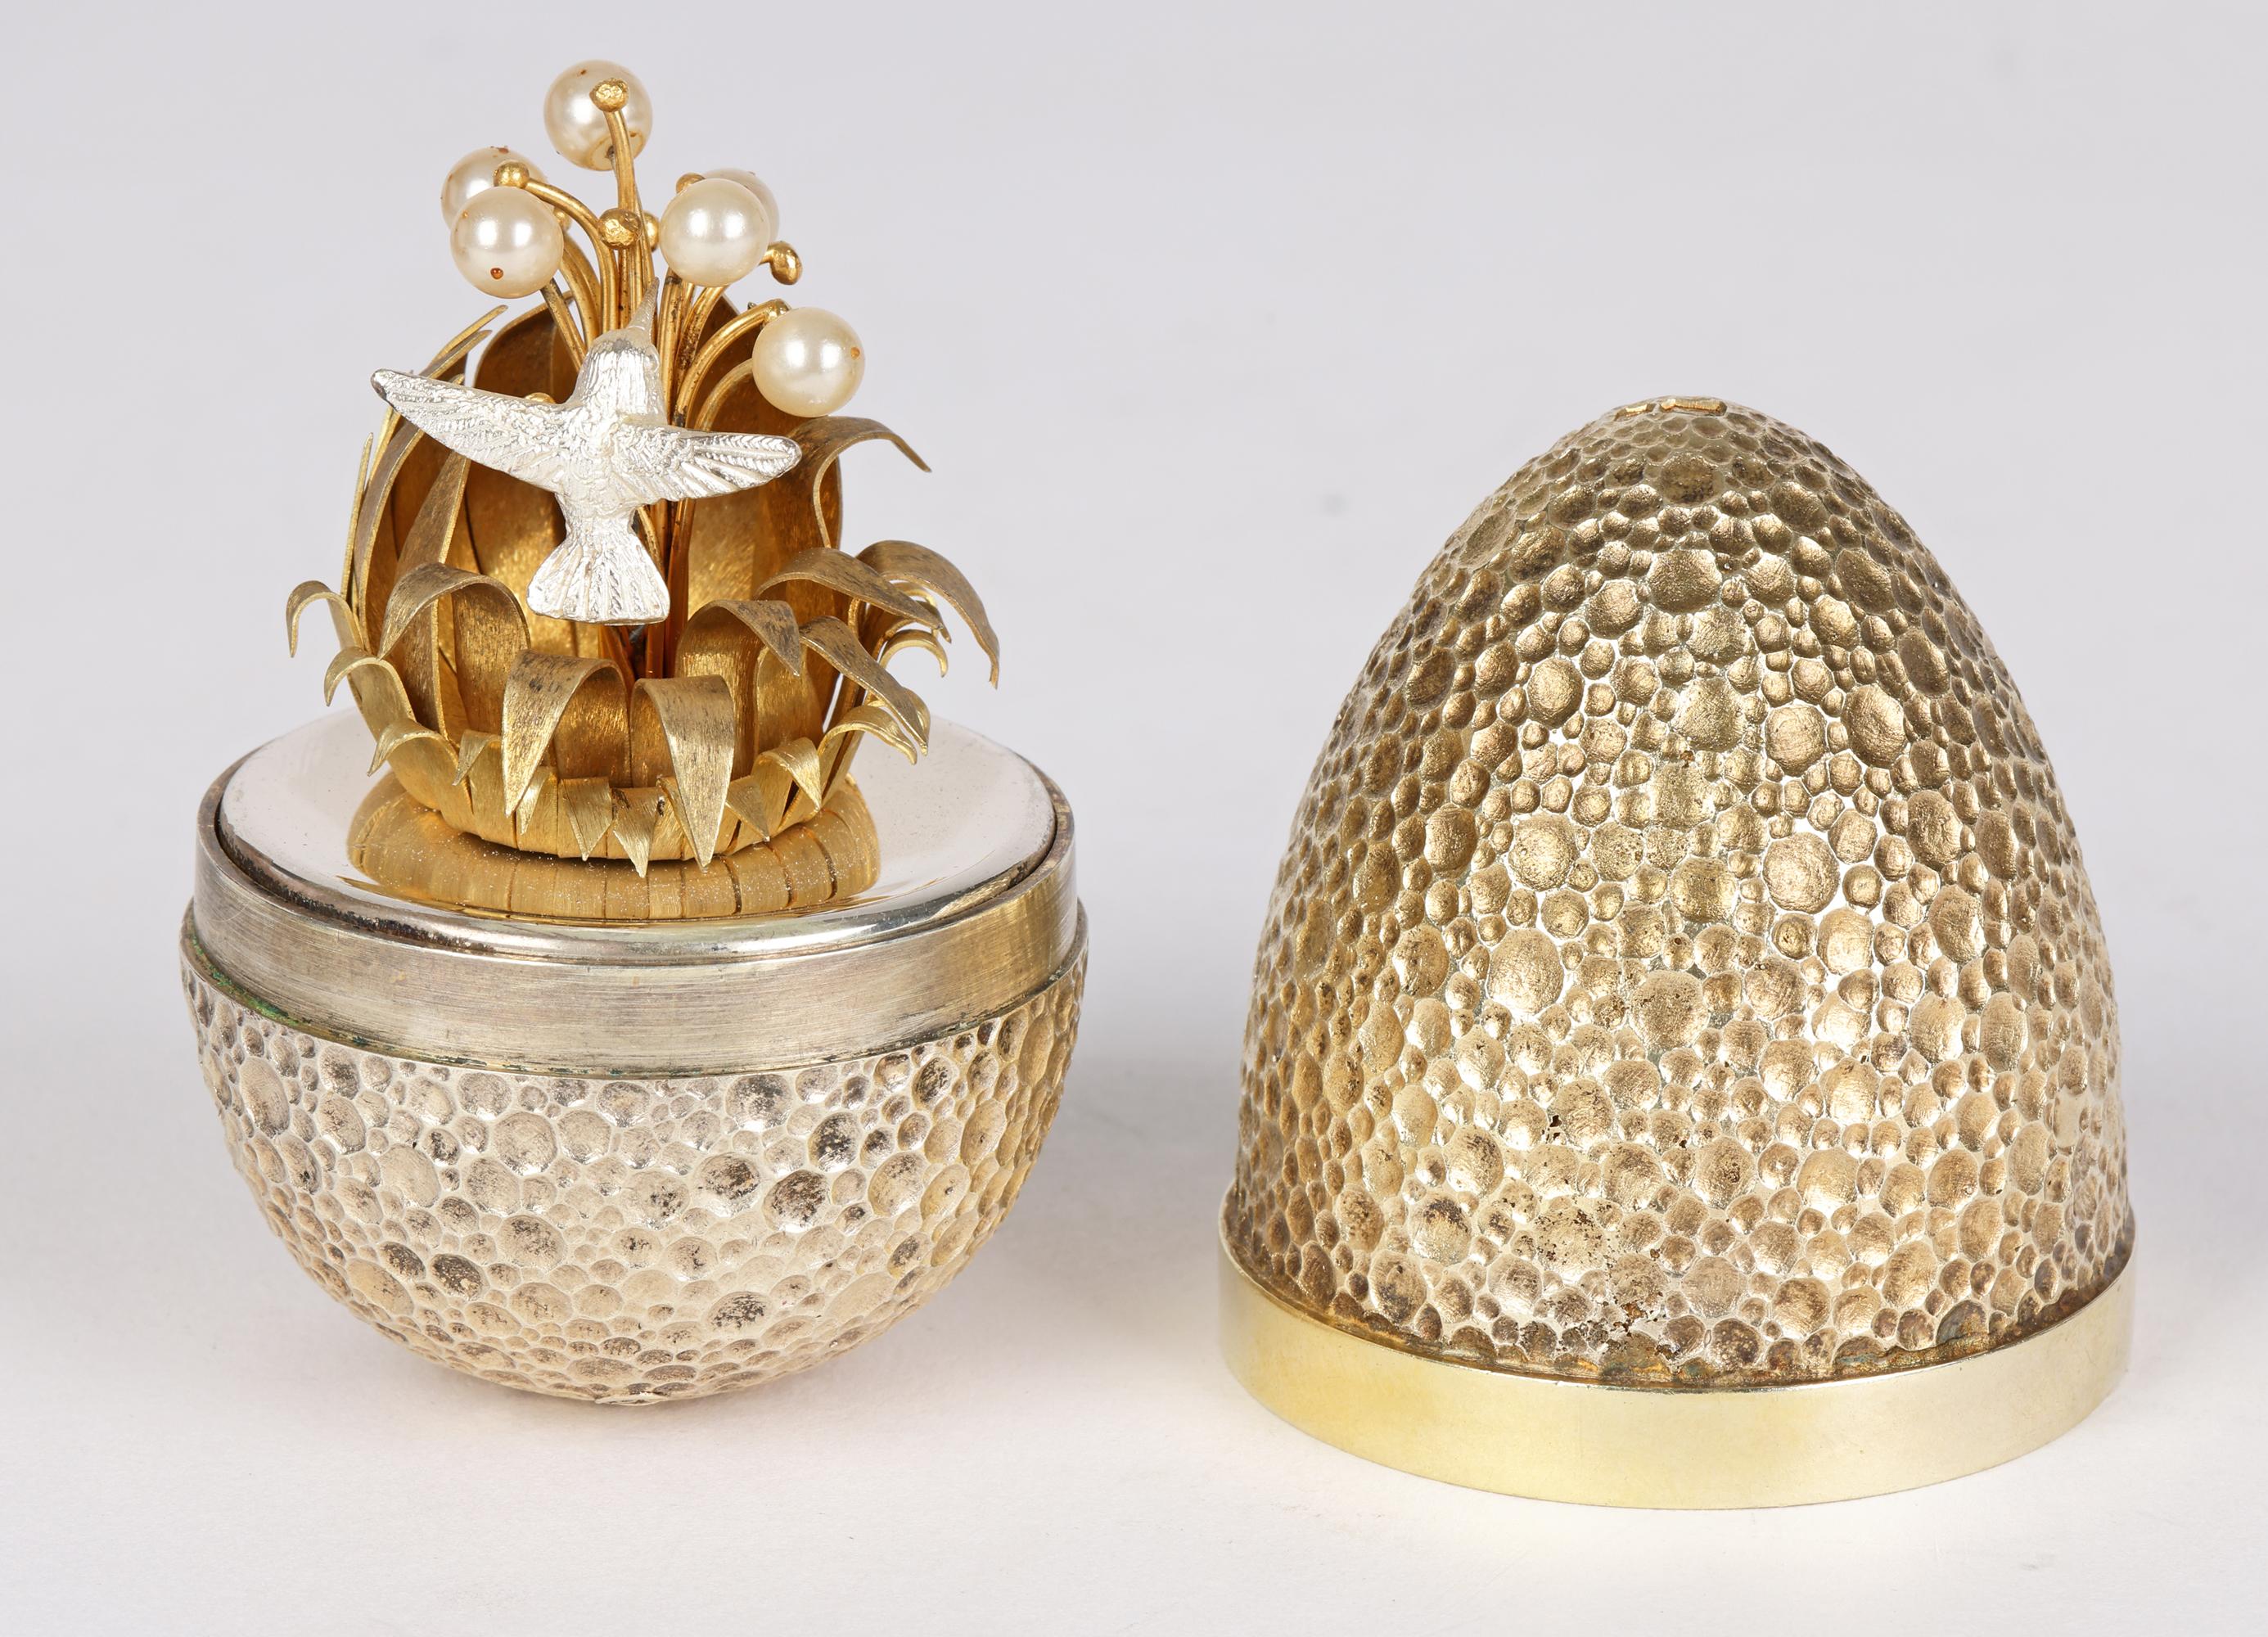 A highly collectable and delightful silver gilt novelty egg containing a hummingbird by renowned silversmith and artist Stuart Devlin (Australian, 1931-2018) and dated 1977.
Stuart Devlin created a range of silver gilt eggs each themed with